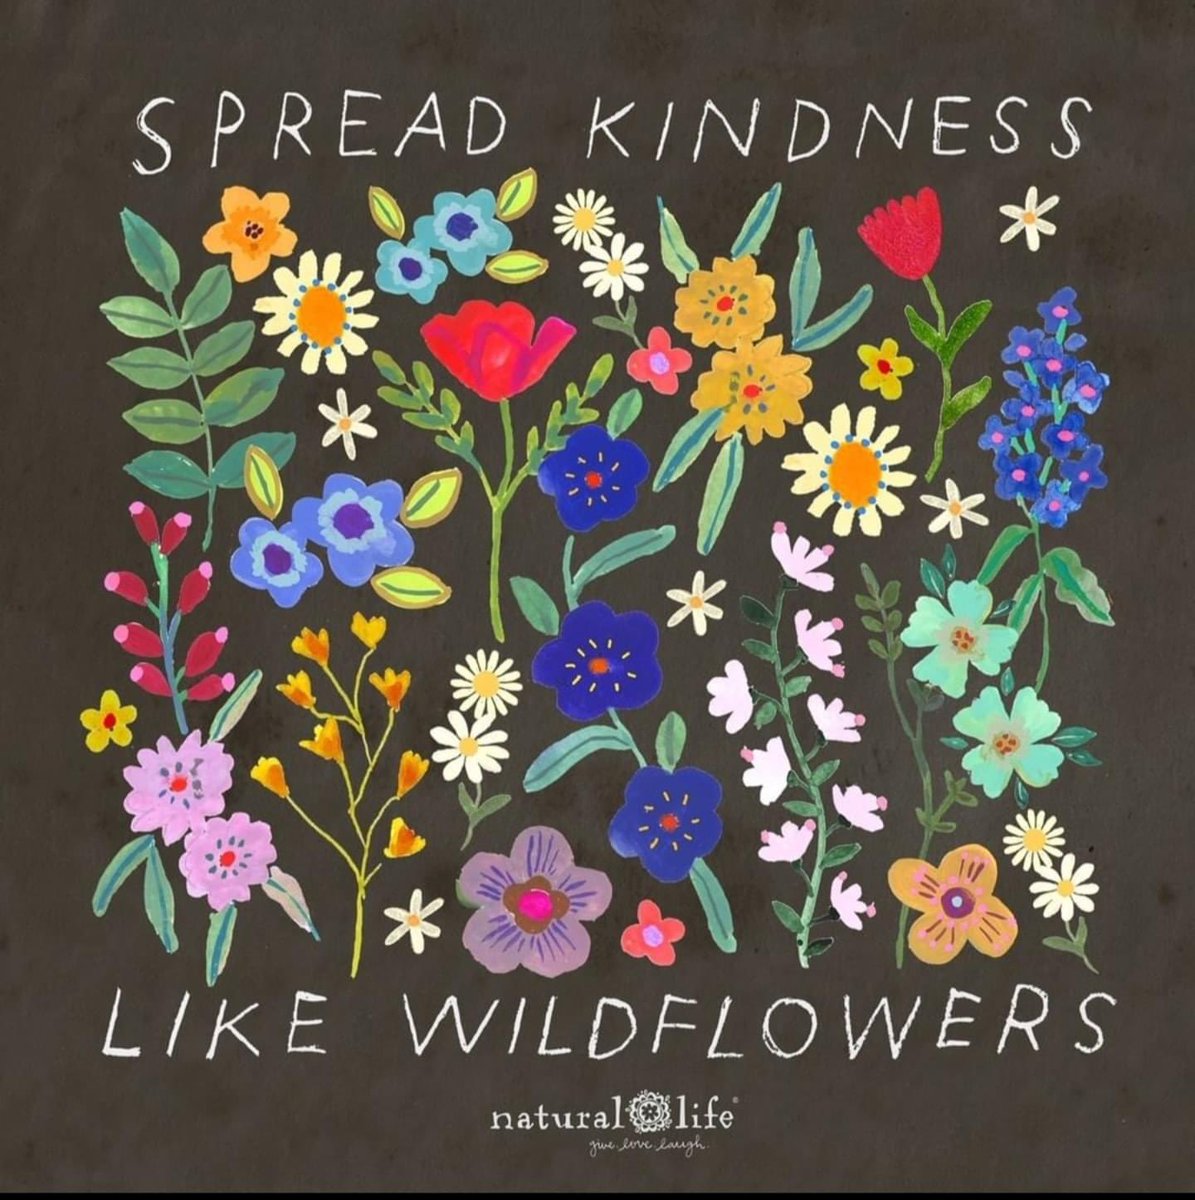 Happy Random Acts of Kindness Day! ❤️🌼🌺🌸

#randomactofkindnessday 
#KindnessDay
#KindnessMatters 
#Kindness